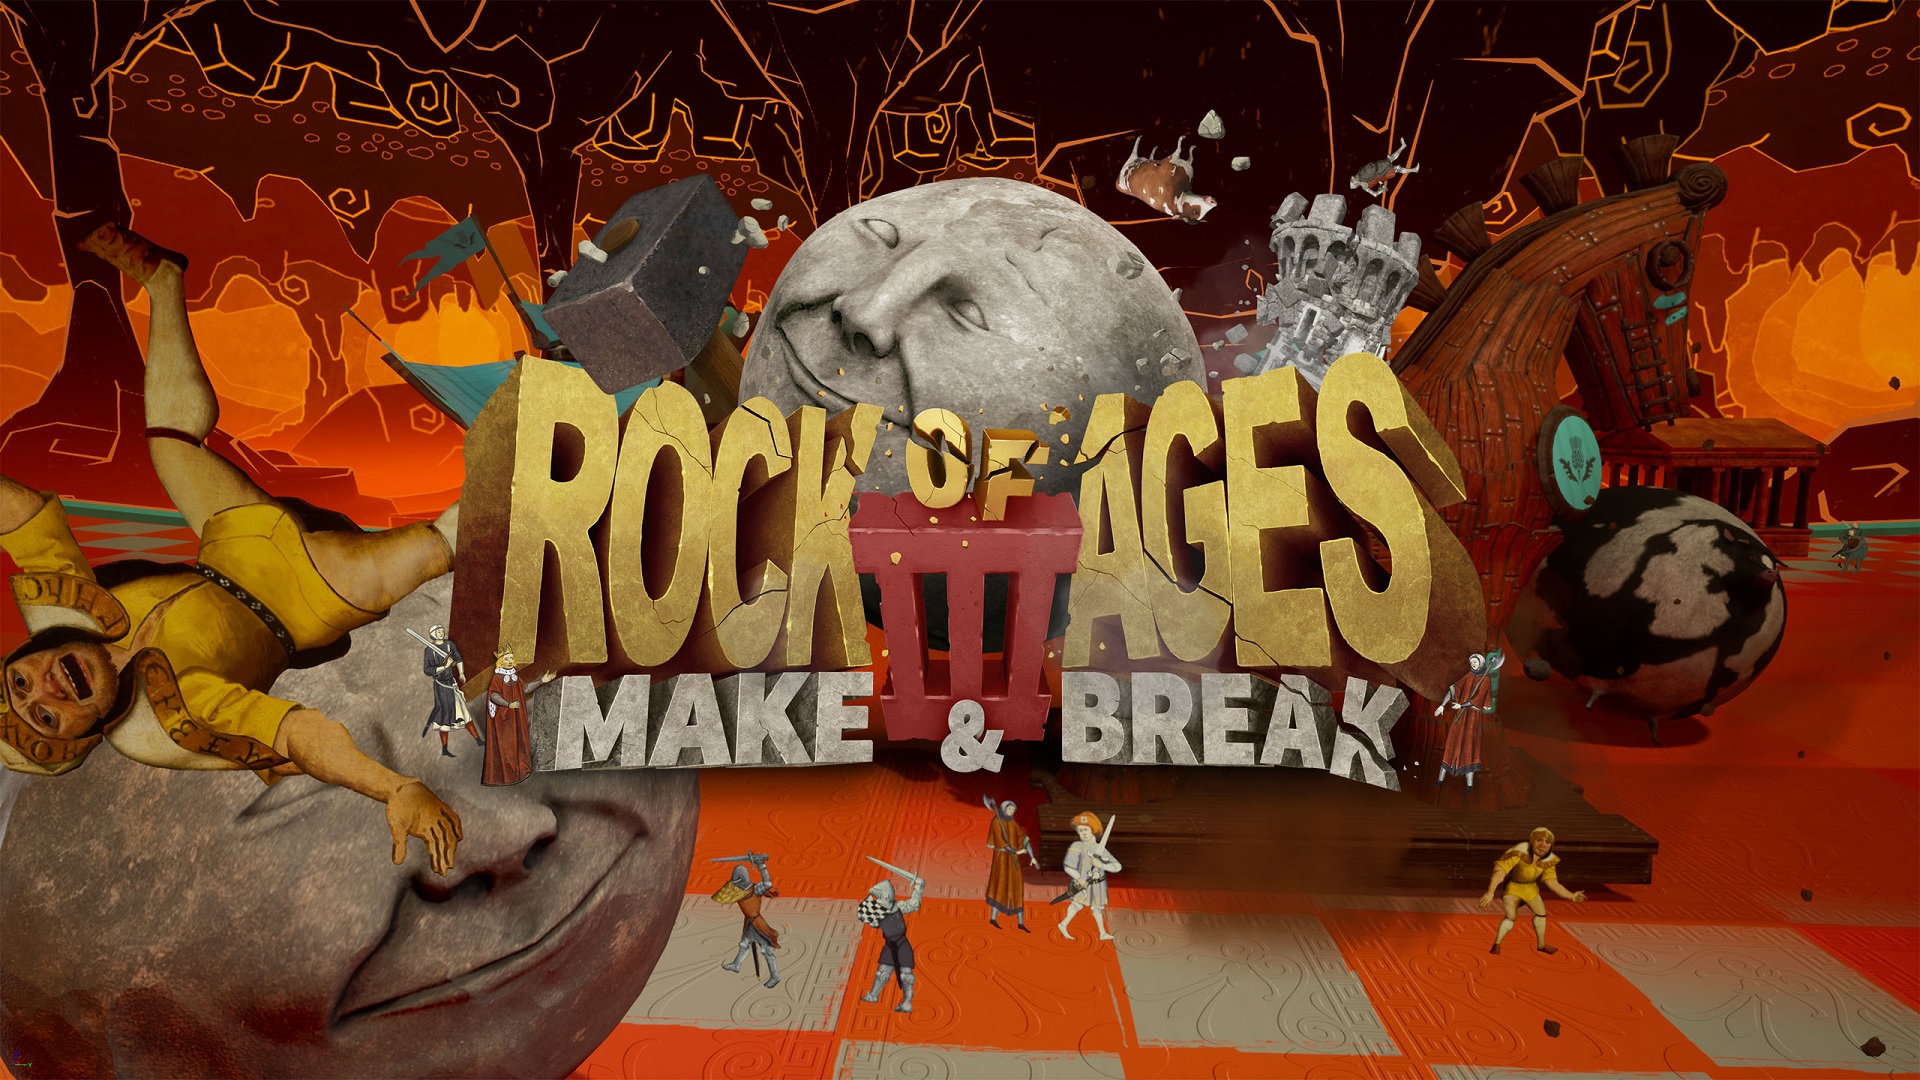 Rock of Ages III: Make & Break Announced for PC and Consoles